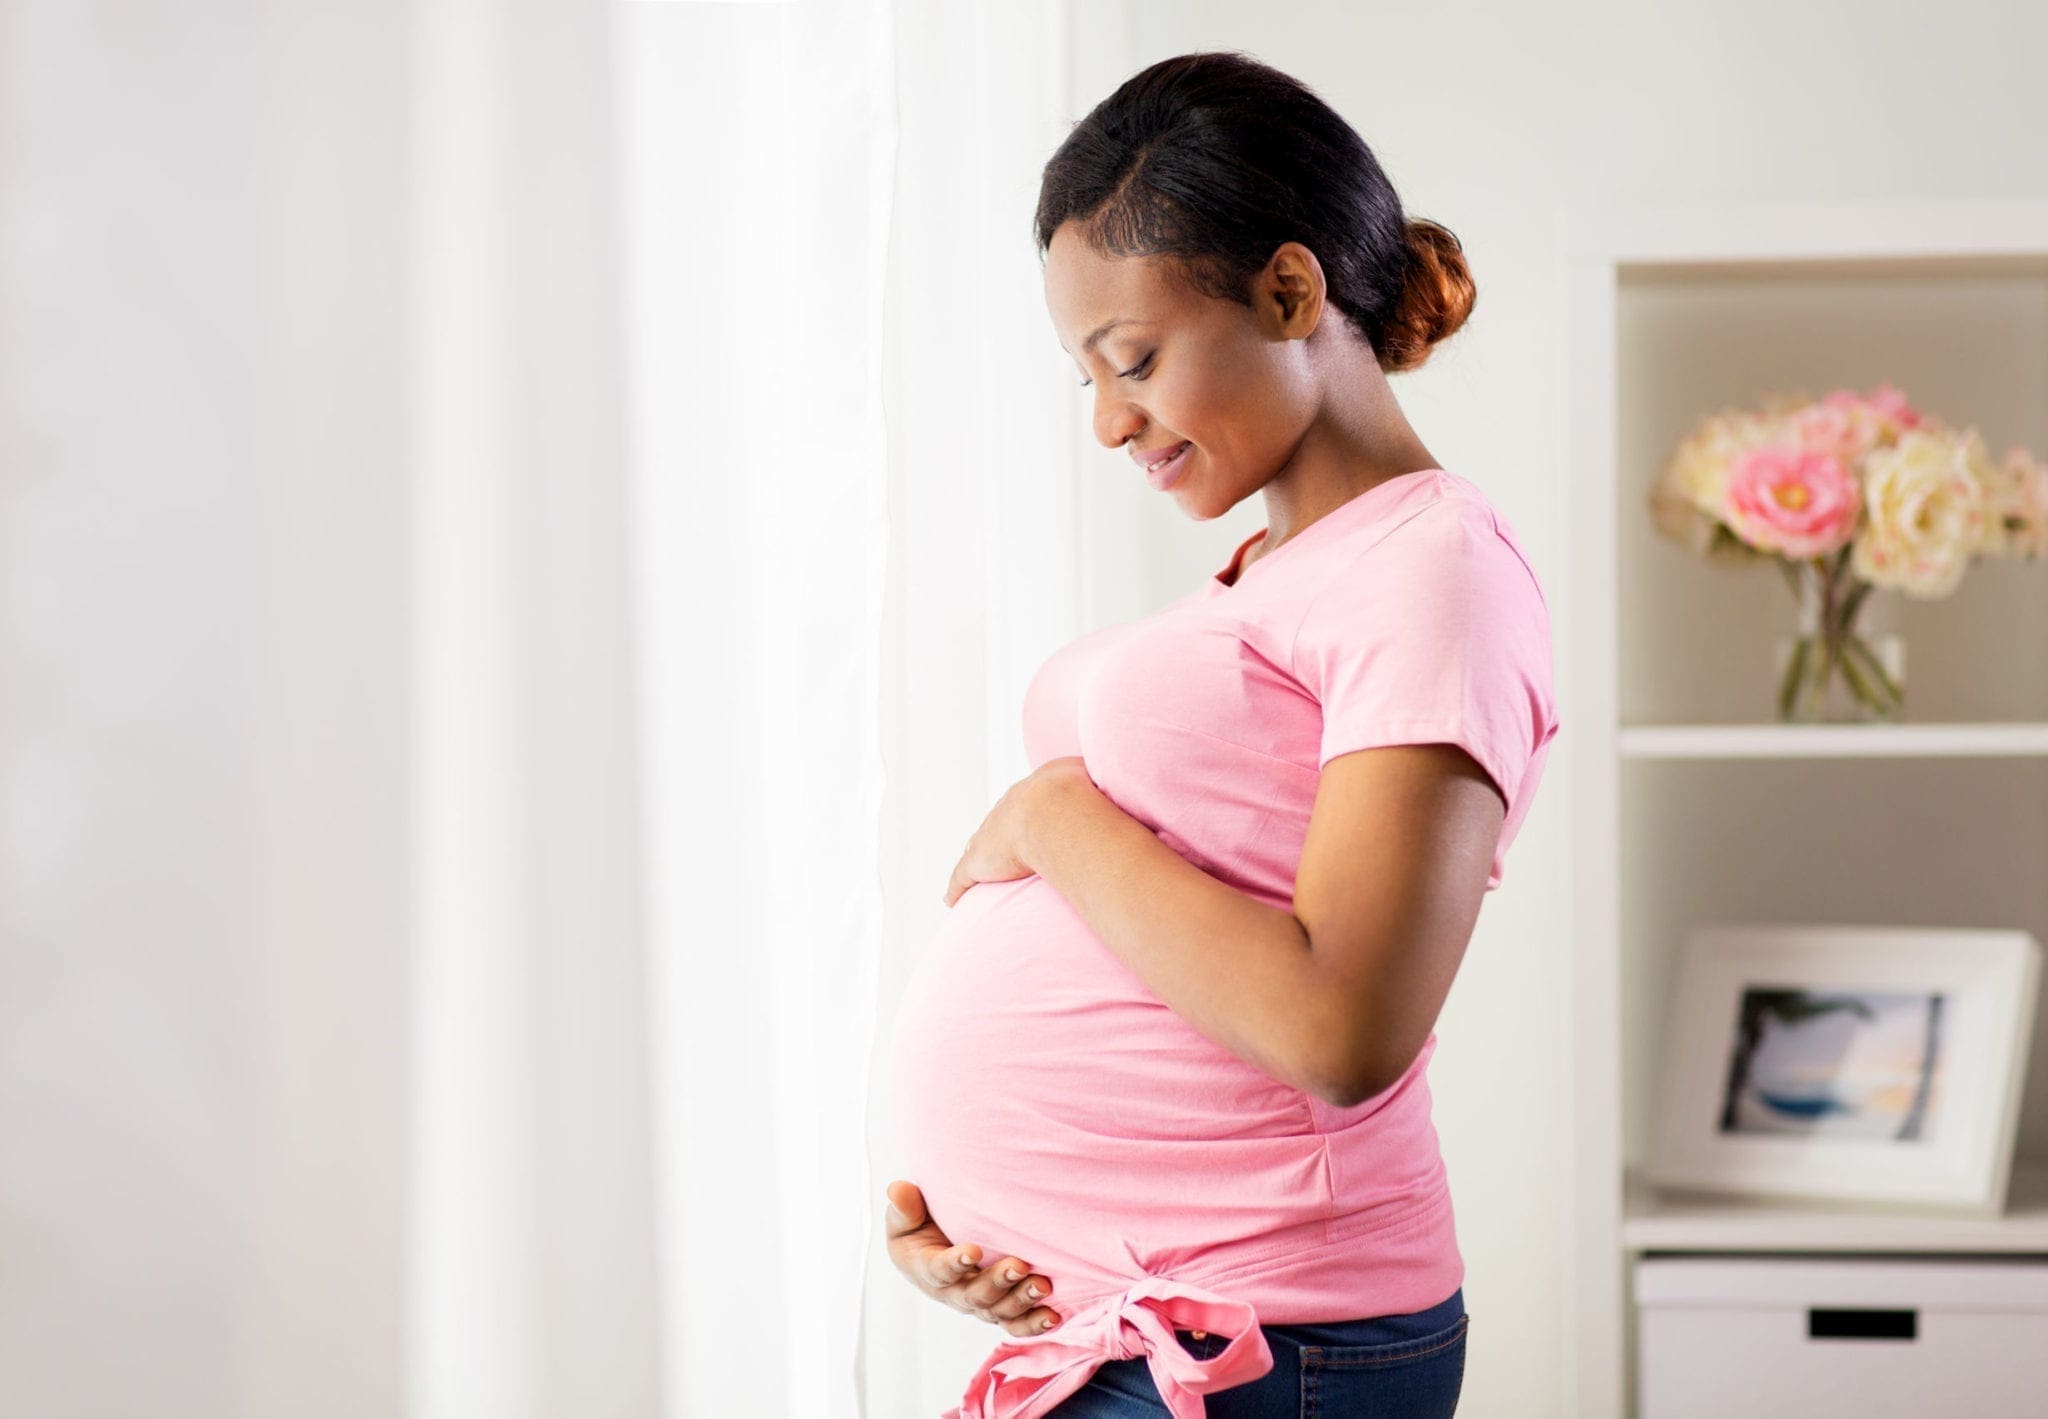 Why Is Tummy Support So Important During Pregnancy?